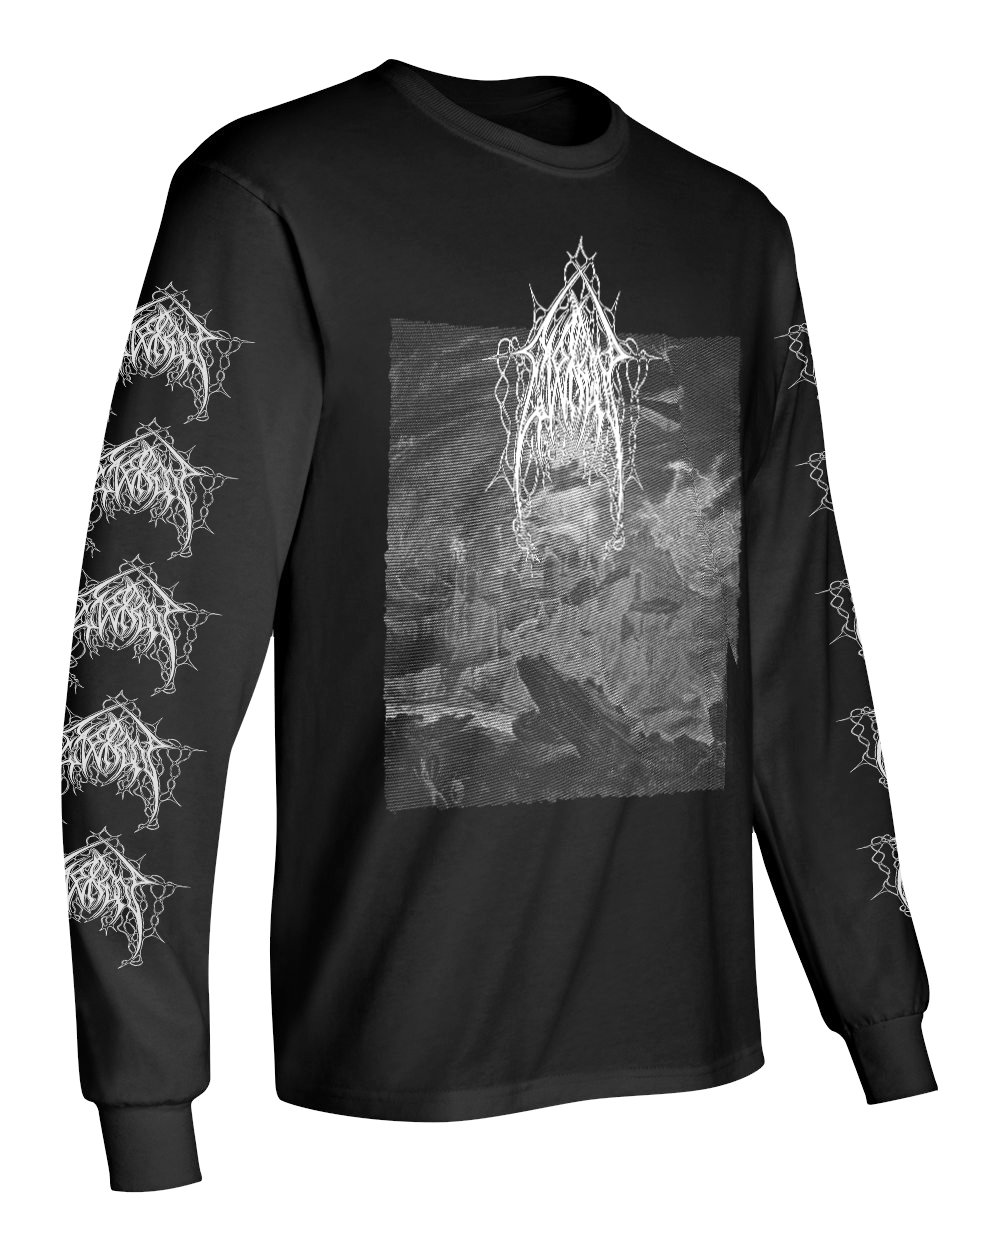 Image of Evoken " Shades Of Night Descending " Long sleeve T shirt with sleeve prints